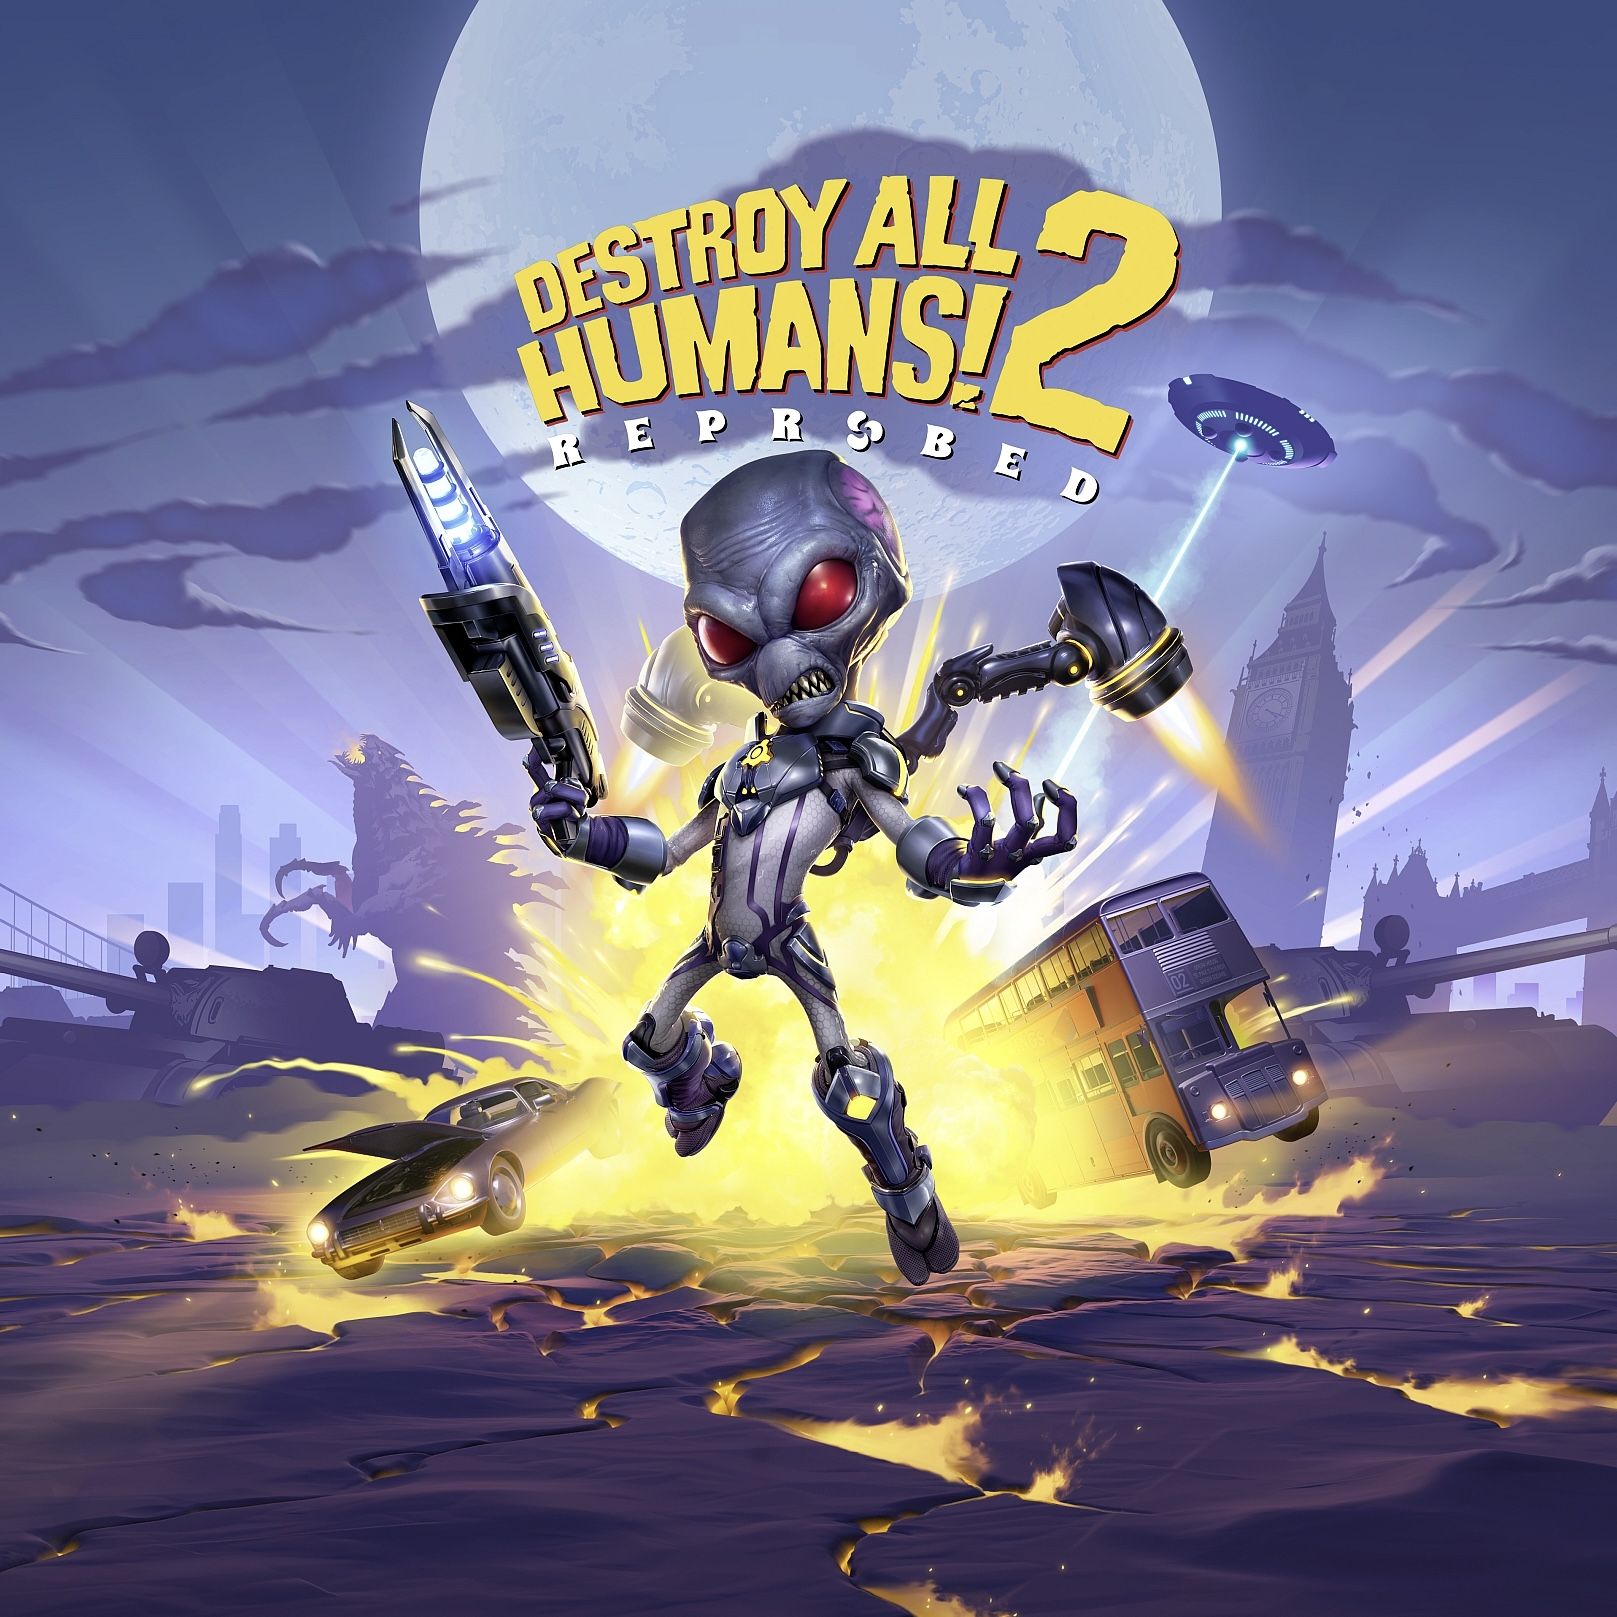 Destroy all humans reprobed. Destroy all Humans 2 reprobed. Destroy all Humans! 2 - Reprobed (ps5). Игры на ПС. Destroy all Humans!.